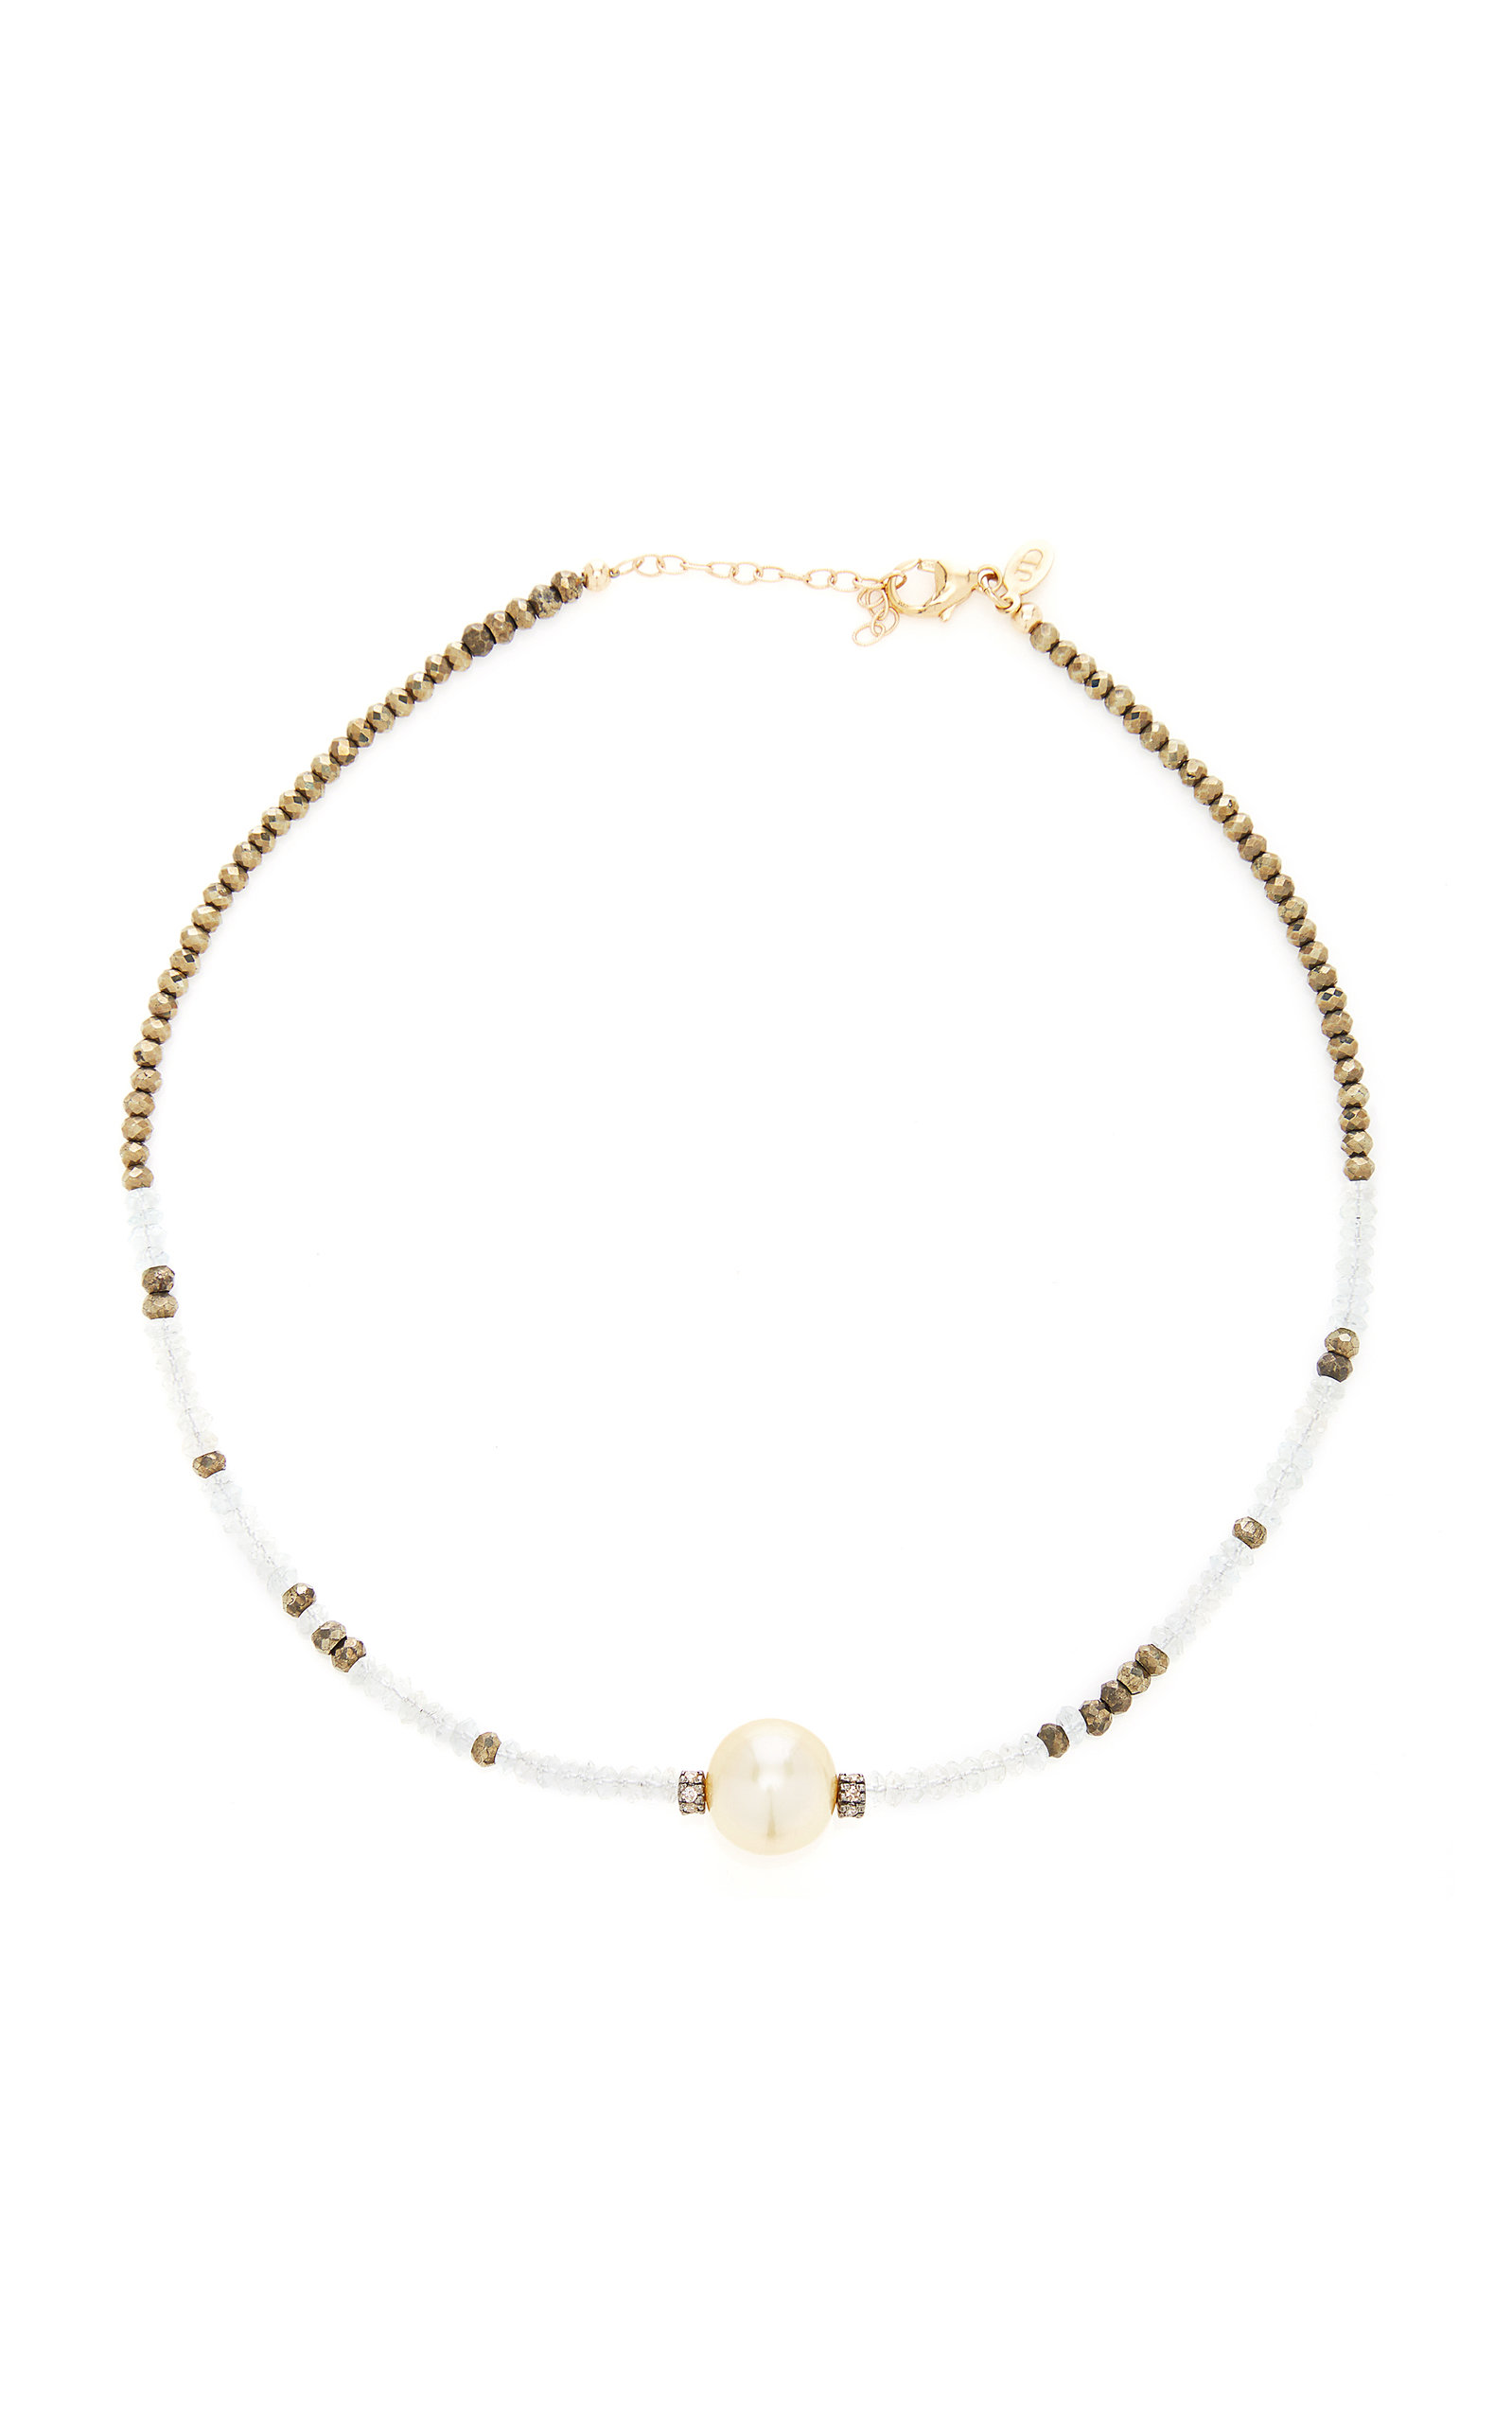 14K Gold; Aquamarine; Pyrite and Pearl Necklace